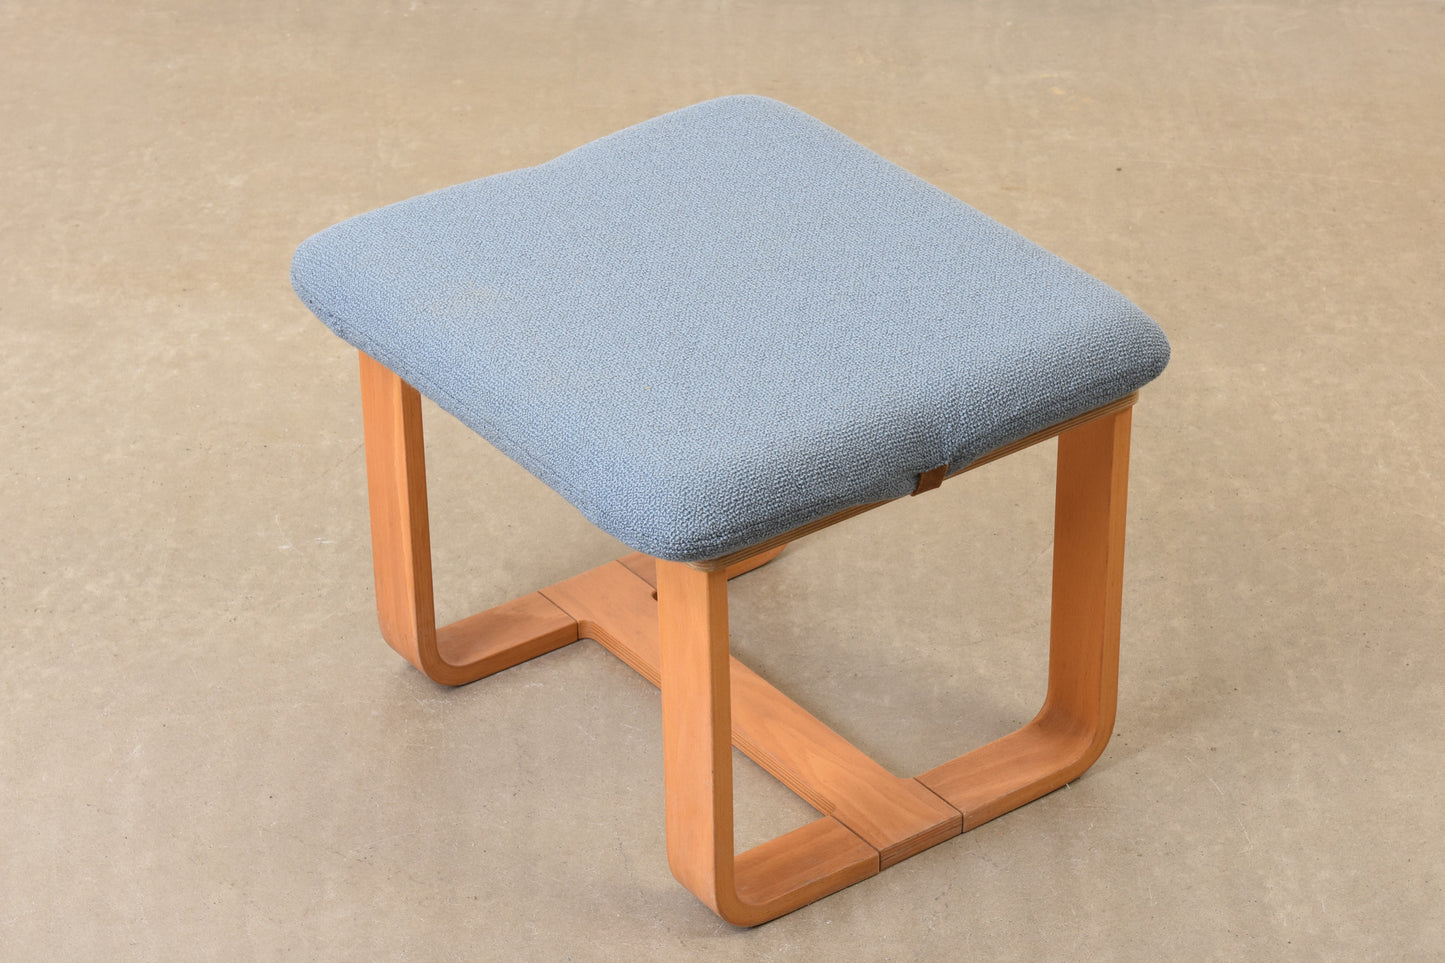 Newly reupholstered: 1980s foot stool by Magnus Olesen